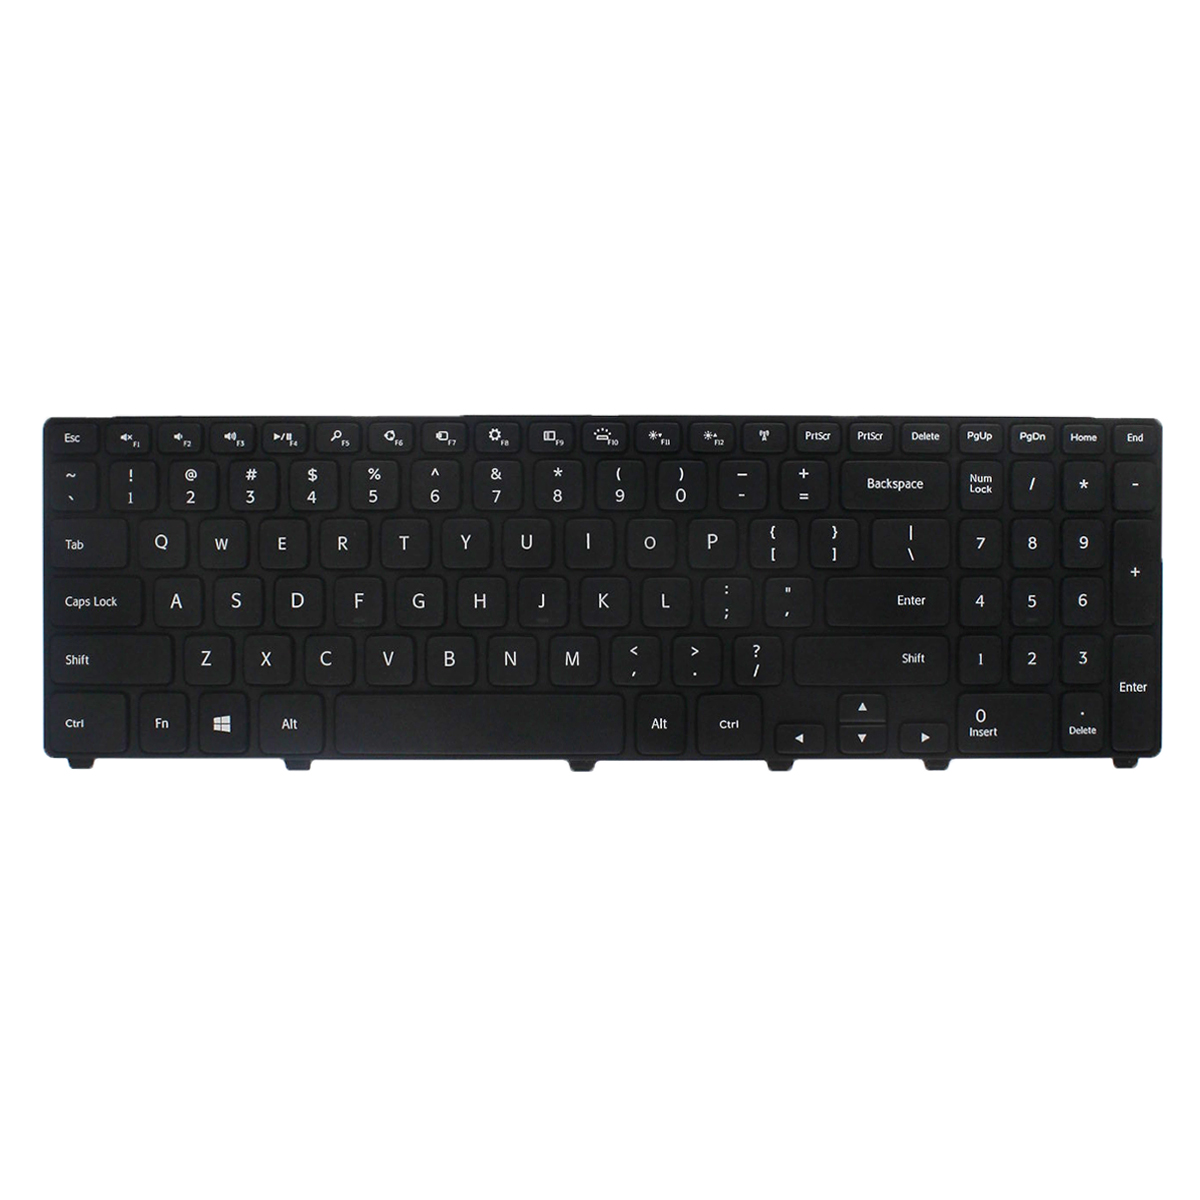 New Keyboard for Dell Inspiron 17 7000 Series 7737 7746 Laptop - Click Image to Close